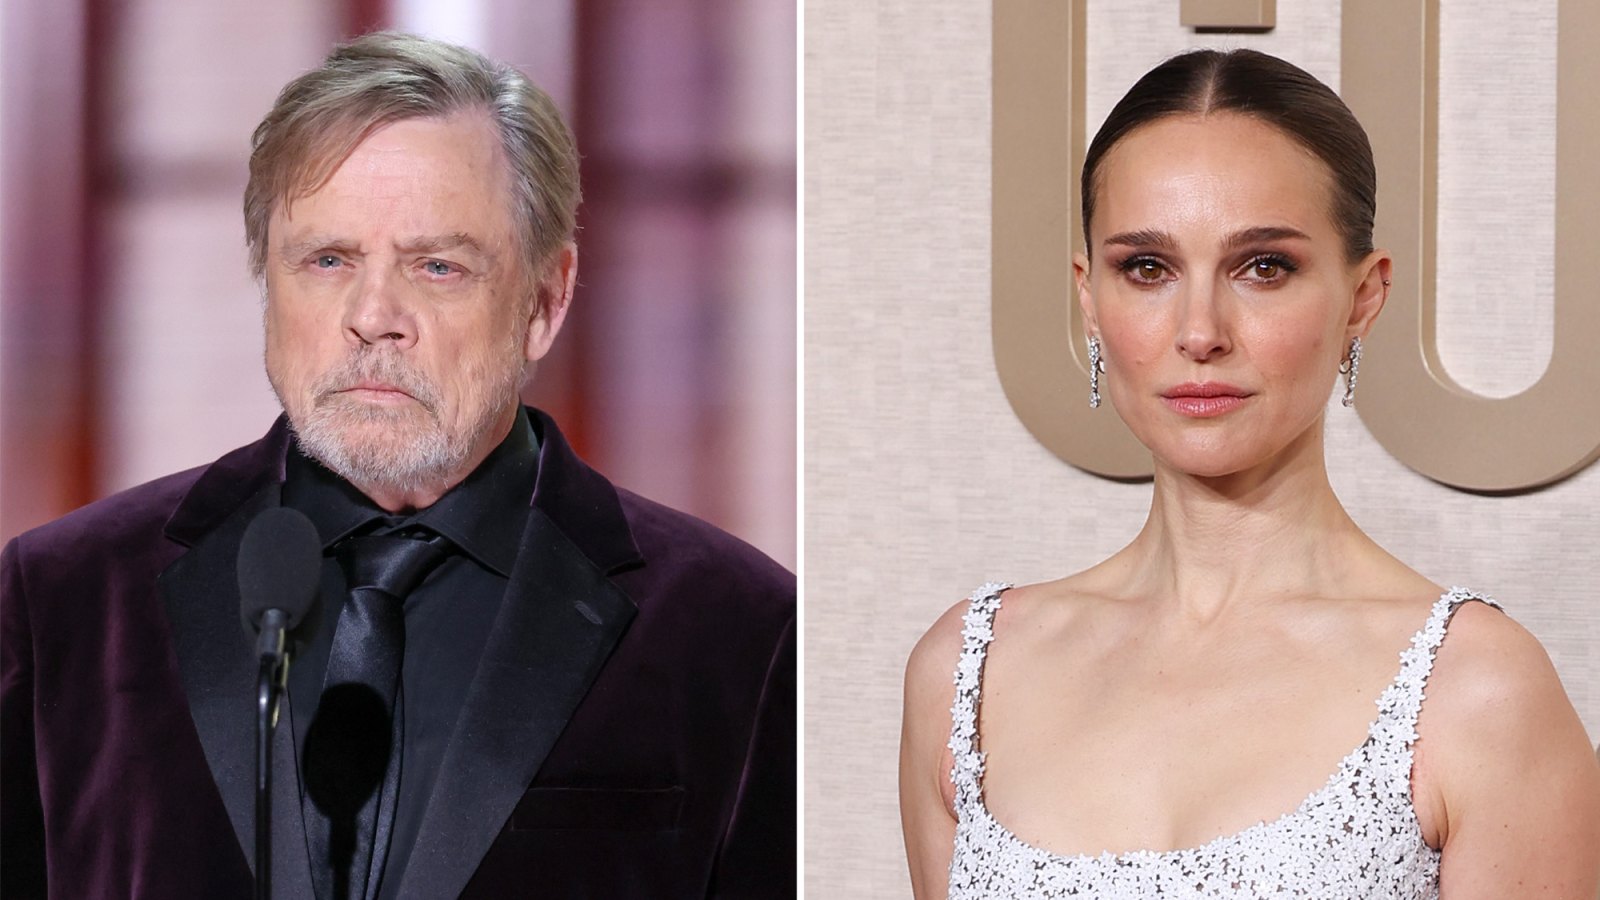 Mark Hamill and Natalie Portman Somehow Met for the 1st Time at Globes